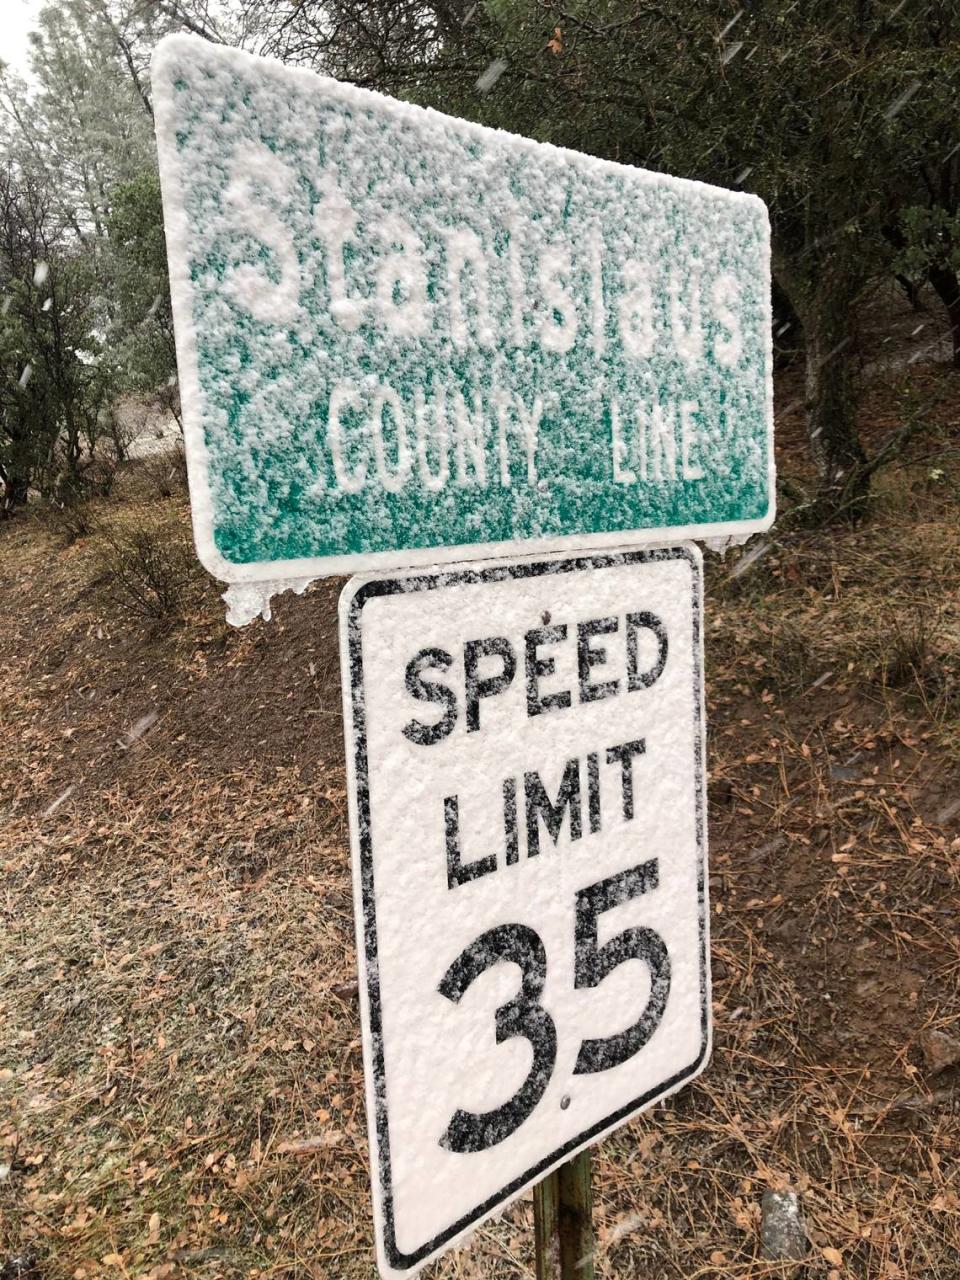 A cold storm blew through the Modesto area on Thursday, bringing wind, rain and even snow to some parts of Stanislaus County.